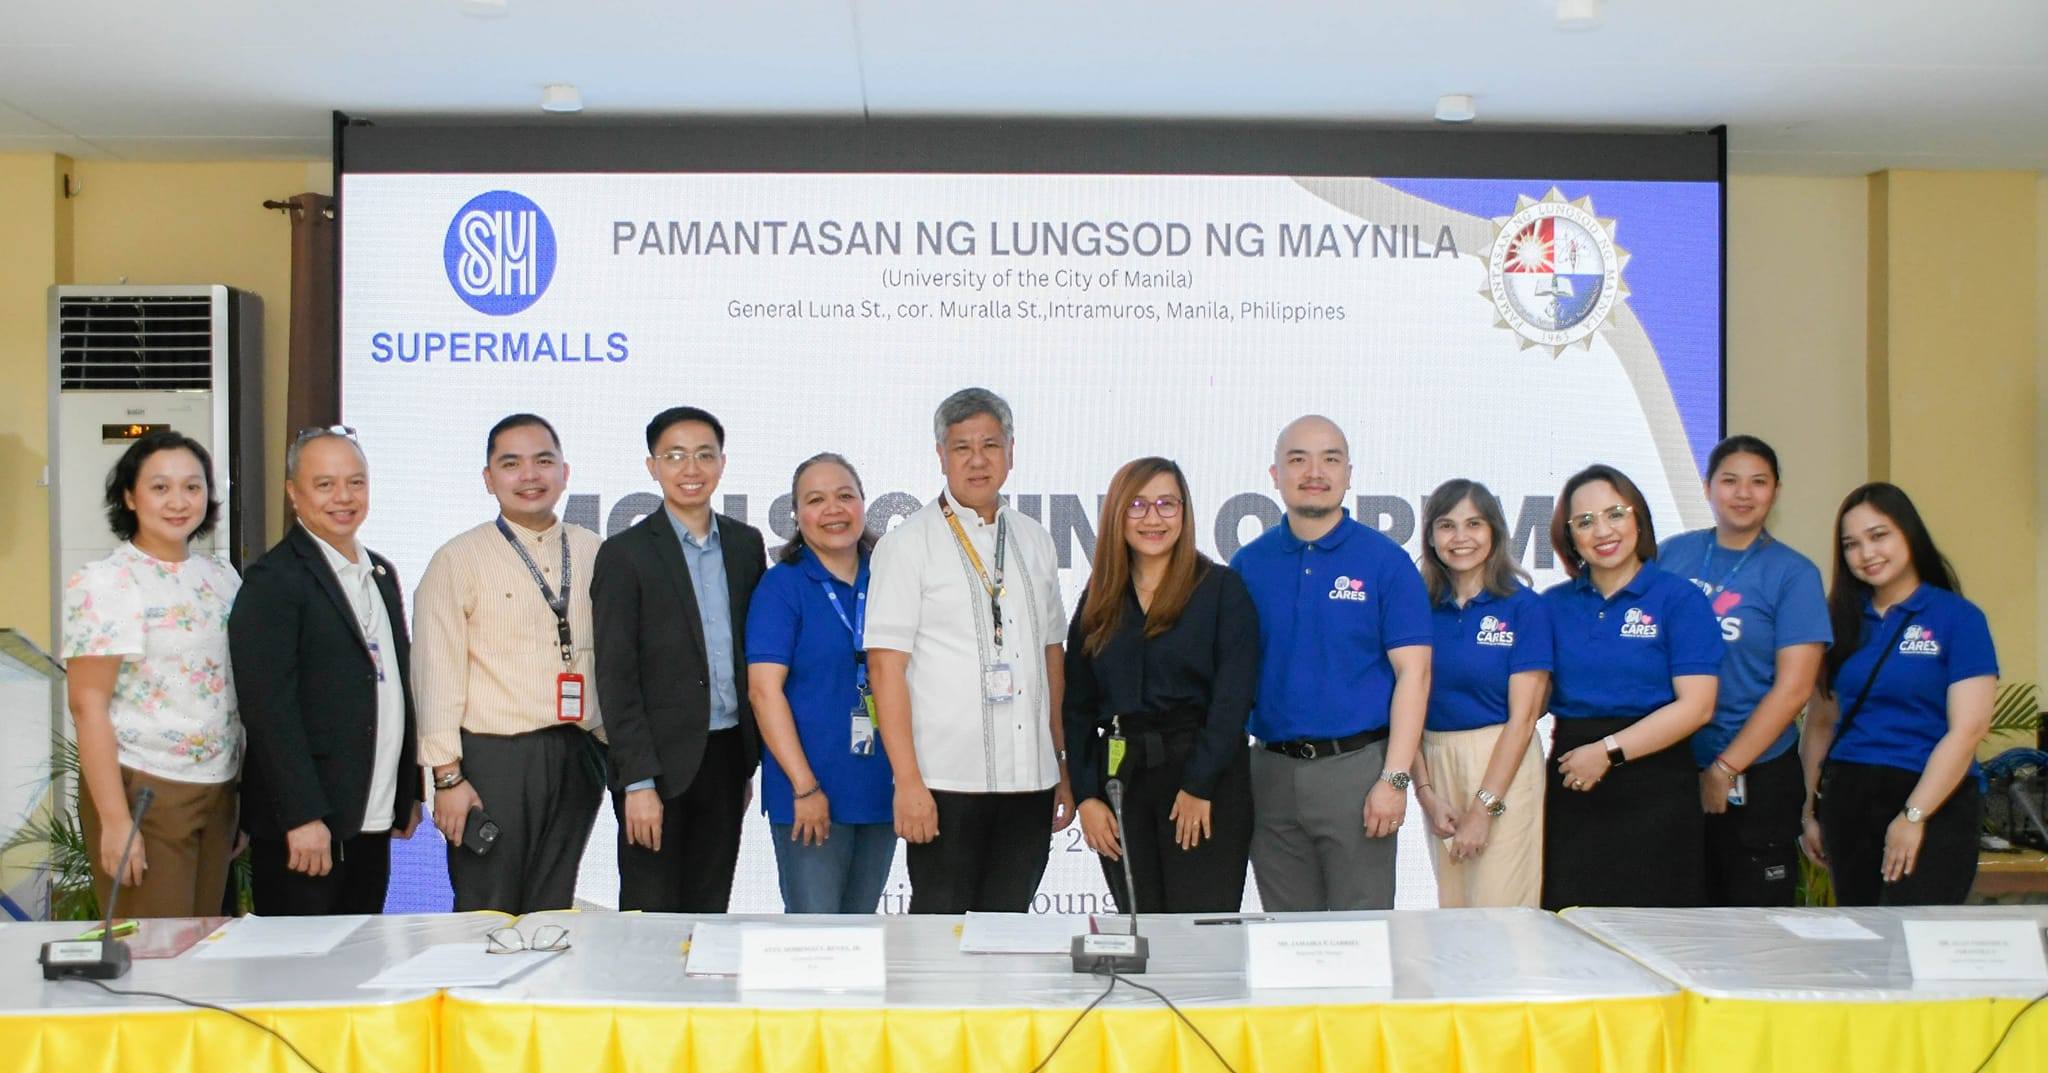 Signing of the Memorandum of Agreement by and between Pamantasan ng Lungsod ng Maynila (PLM) and Shopping Center Management Corporarion (SCMC). The partnership will be in areas of recruitment, job placement, OJT and other learning.